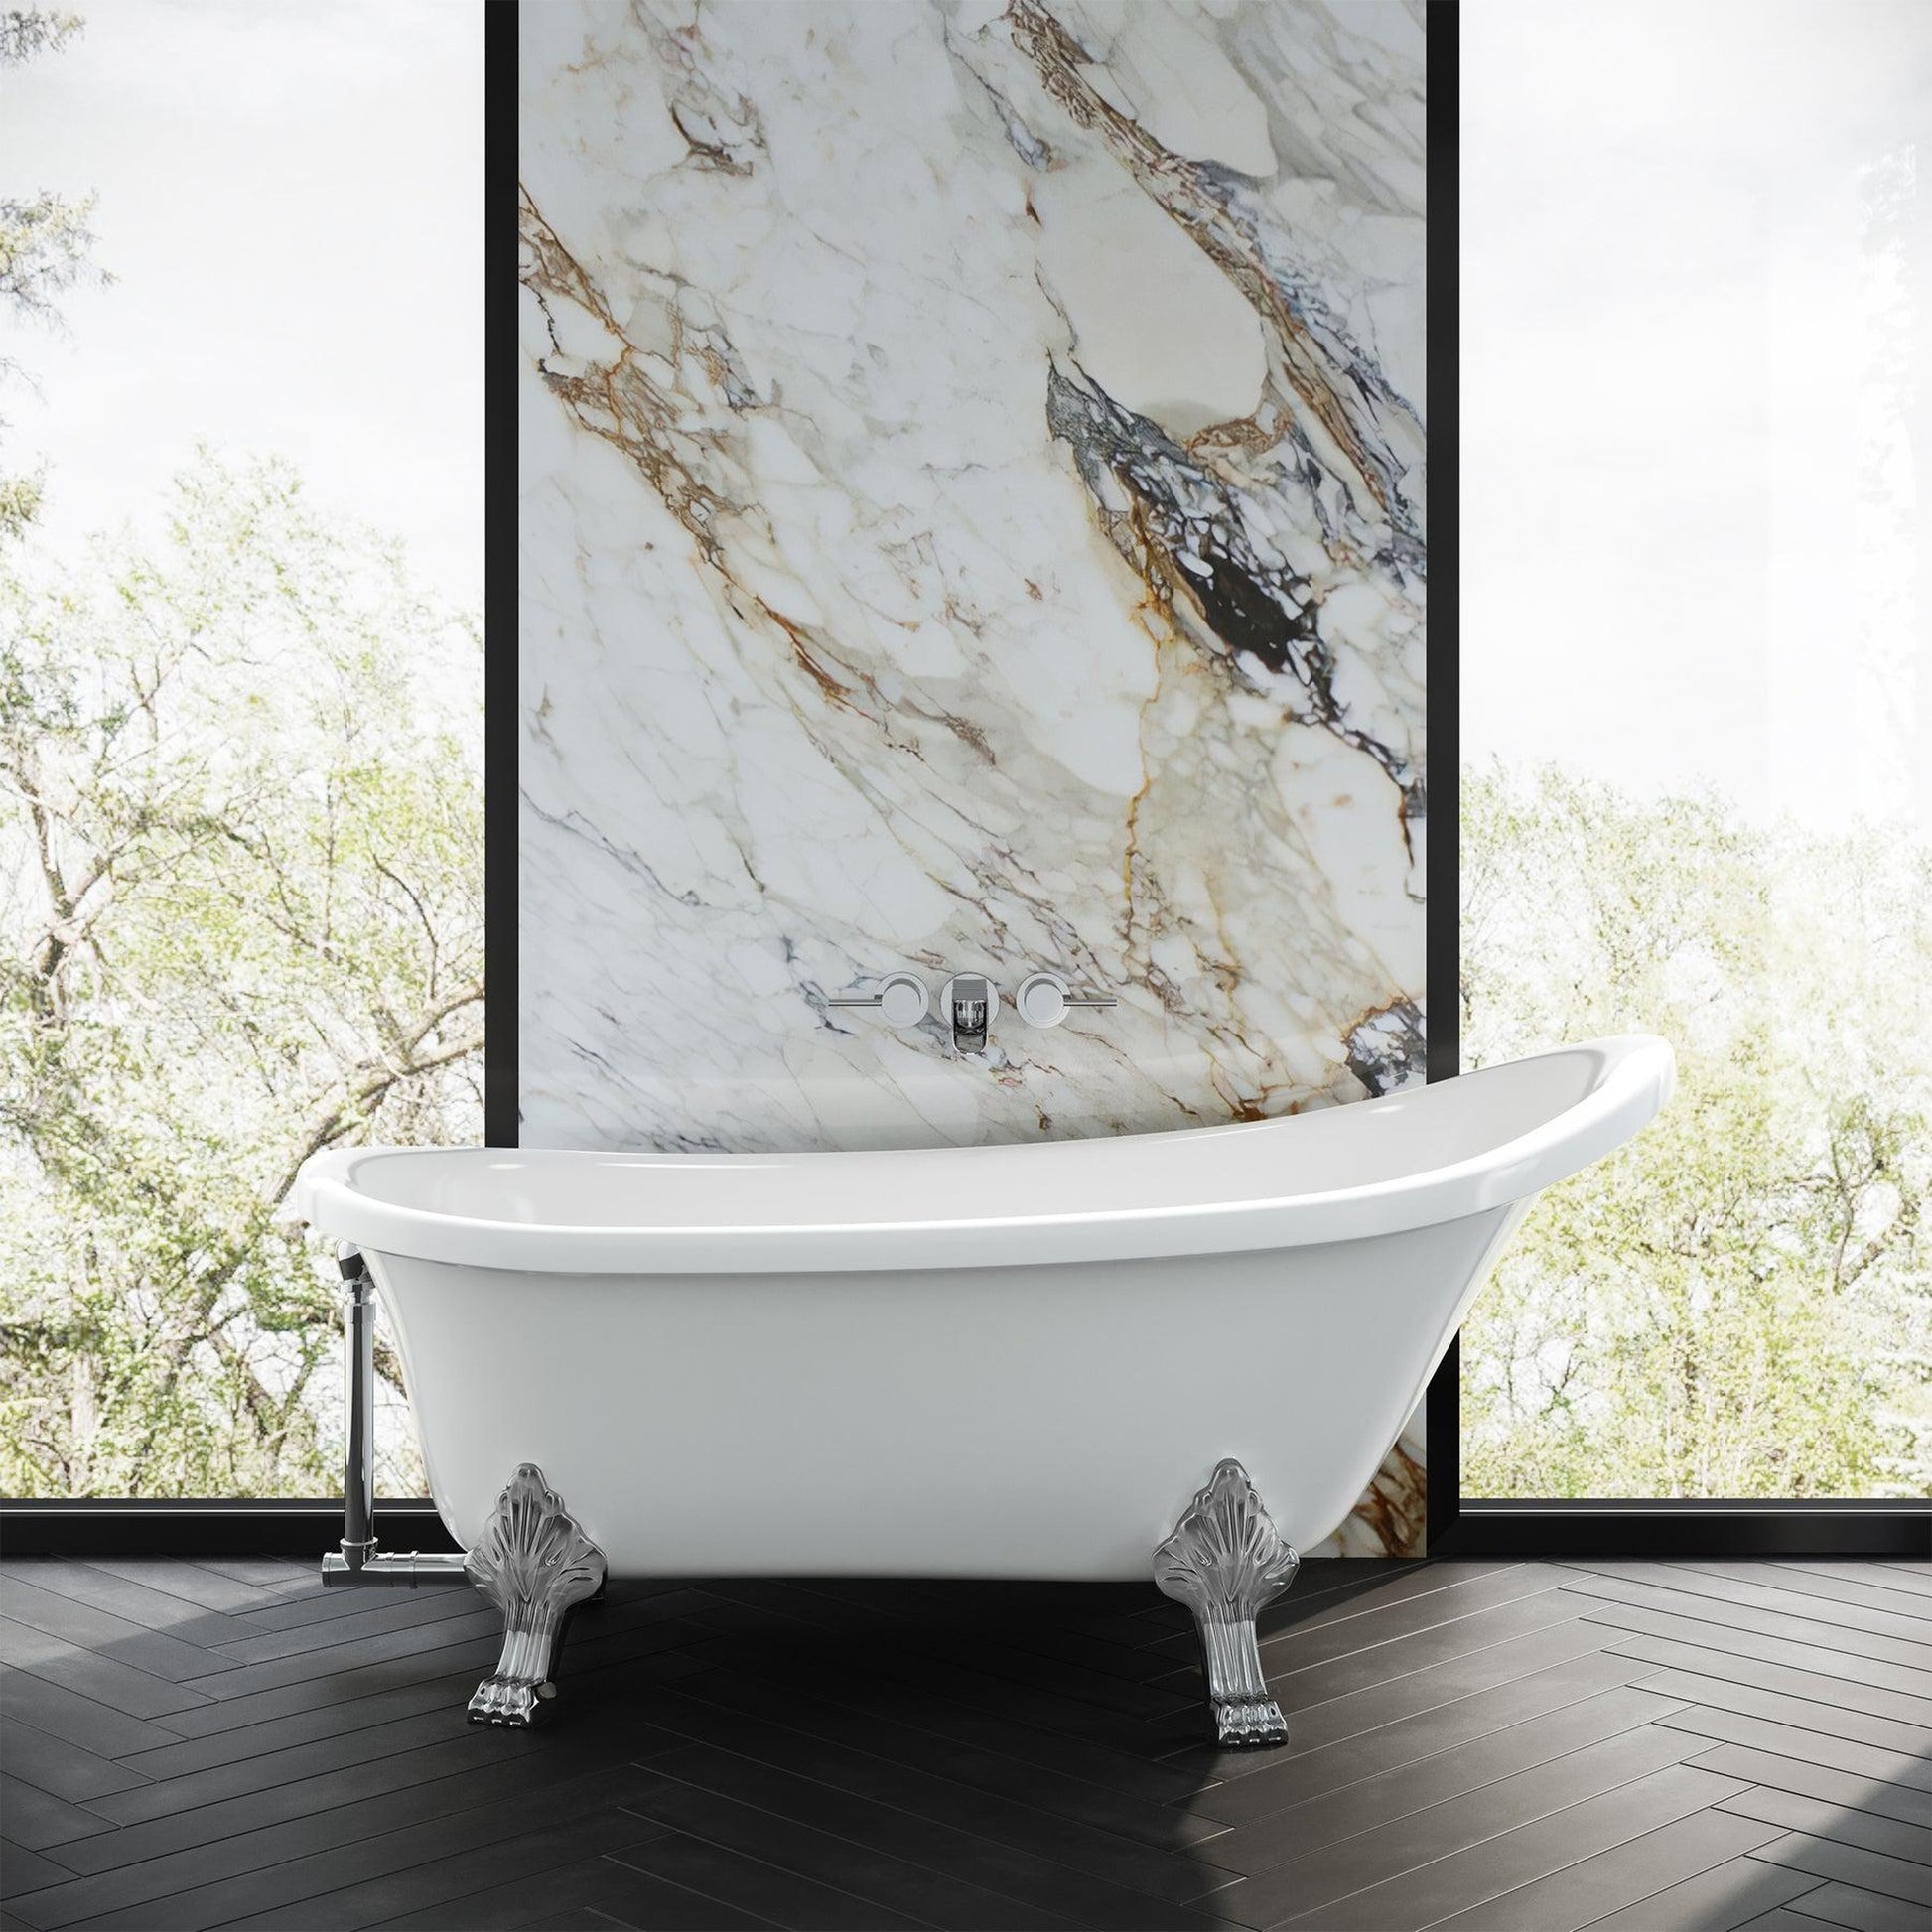 Swiss Madison Caché 63" x 29" White Right-Hand Drain Freestanding Bathtub With Adjustable Chrome Clawfoot Feet, Overflow Kit and Pop-Up Drain